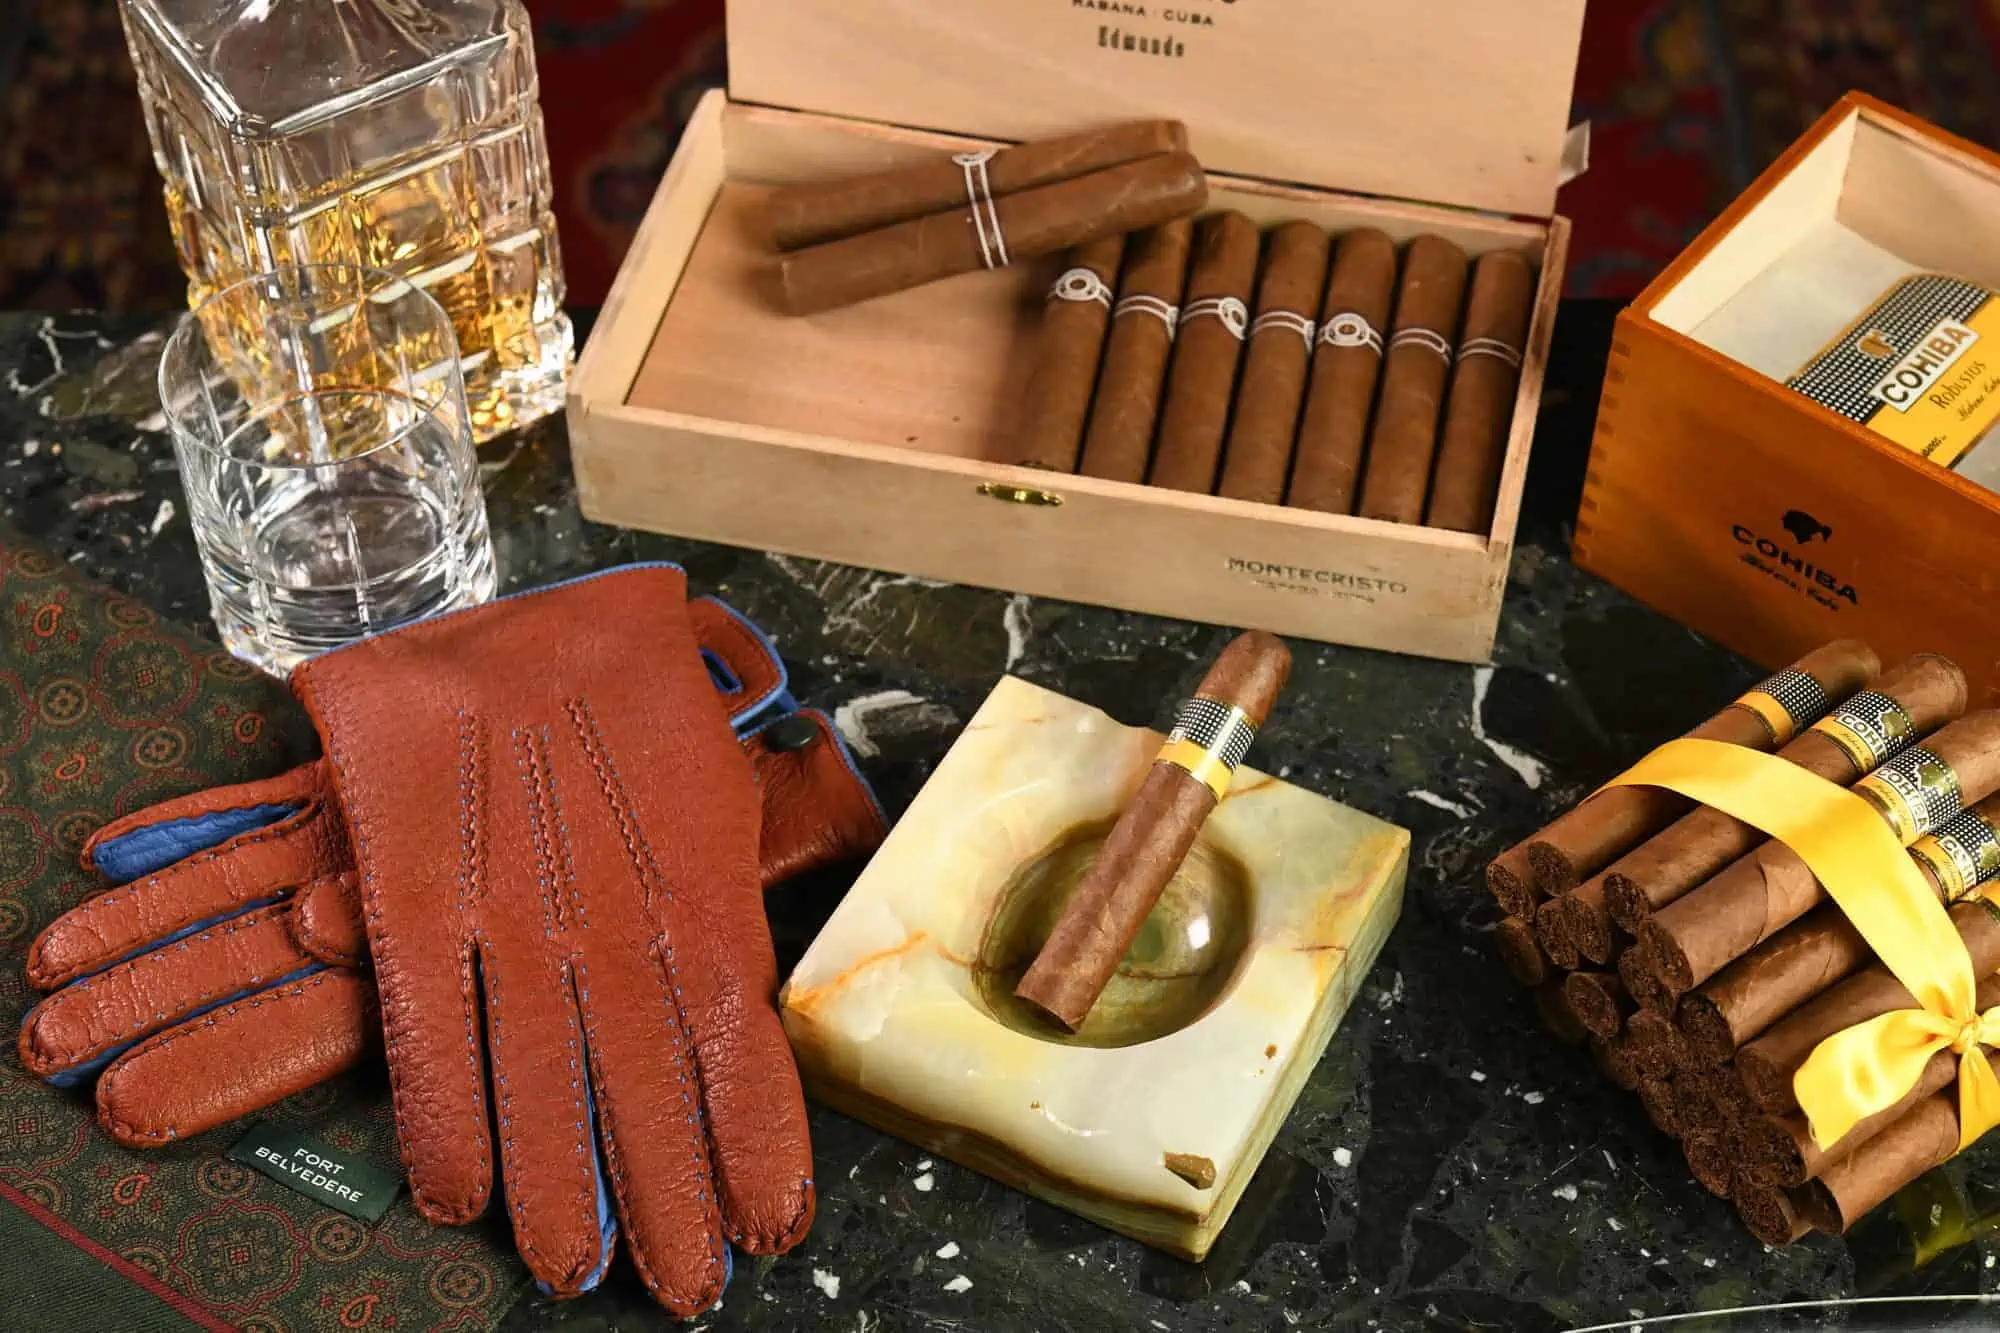 Gloves, scarf, cigars, whiskey assorment of gentlemanly accessories